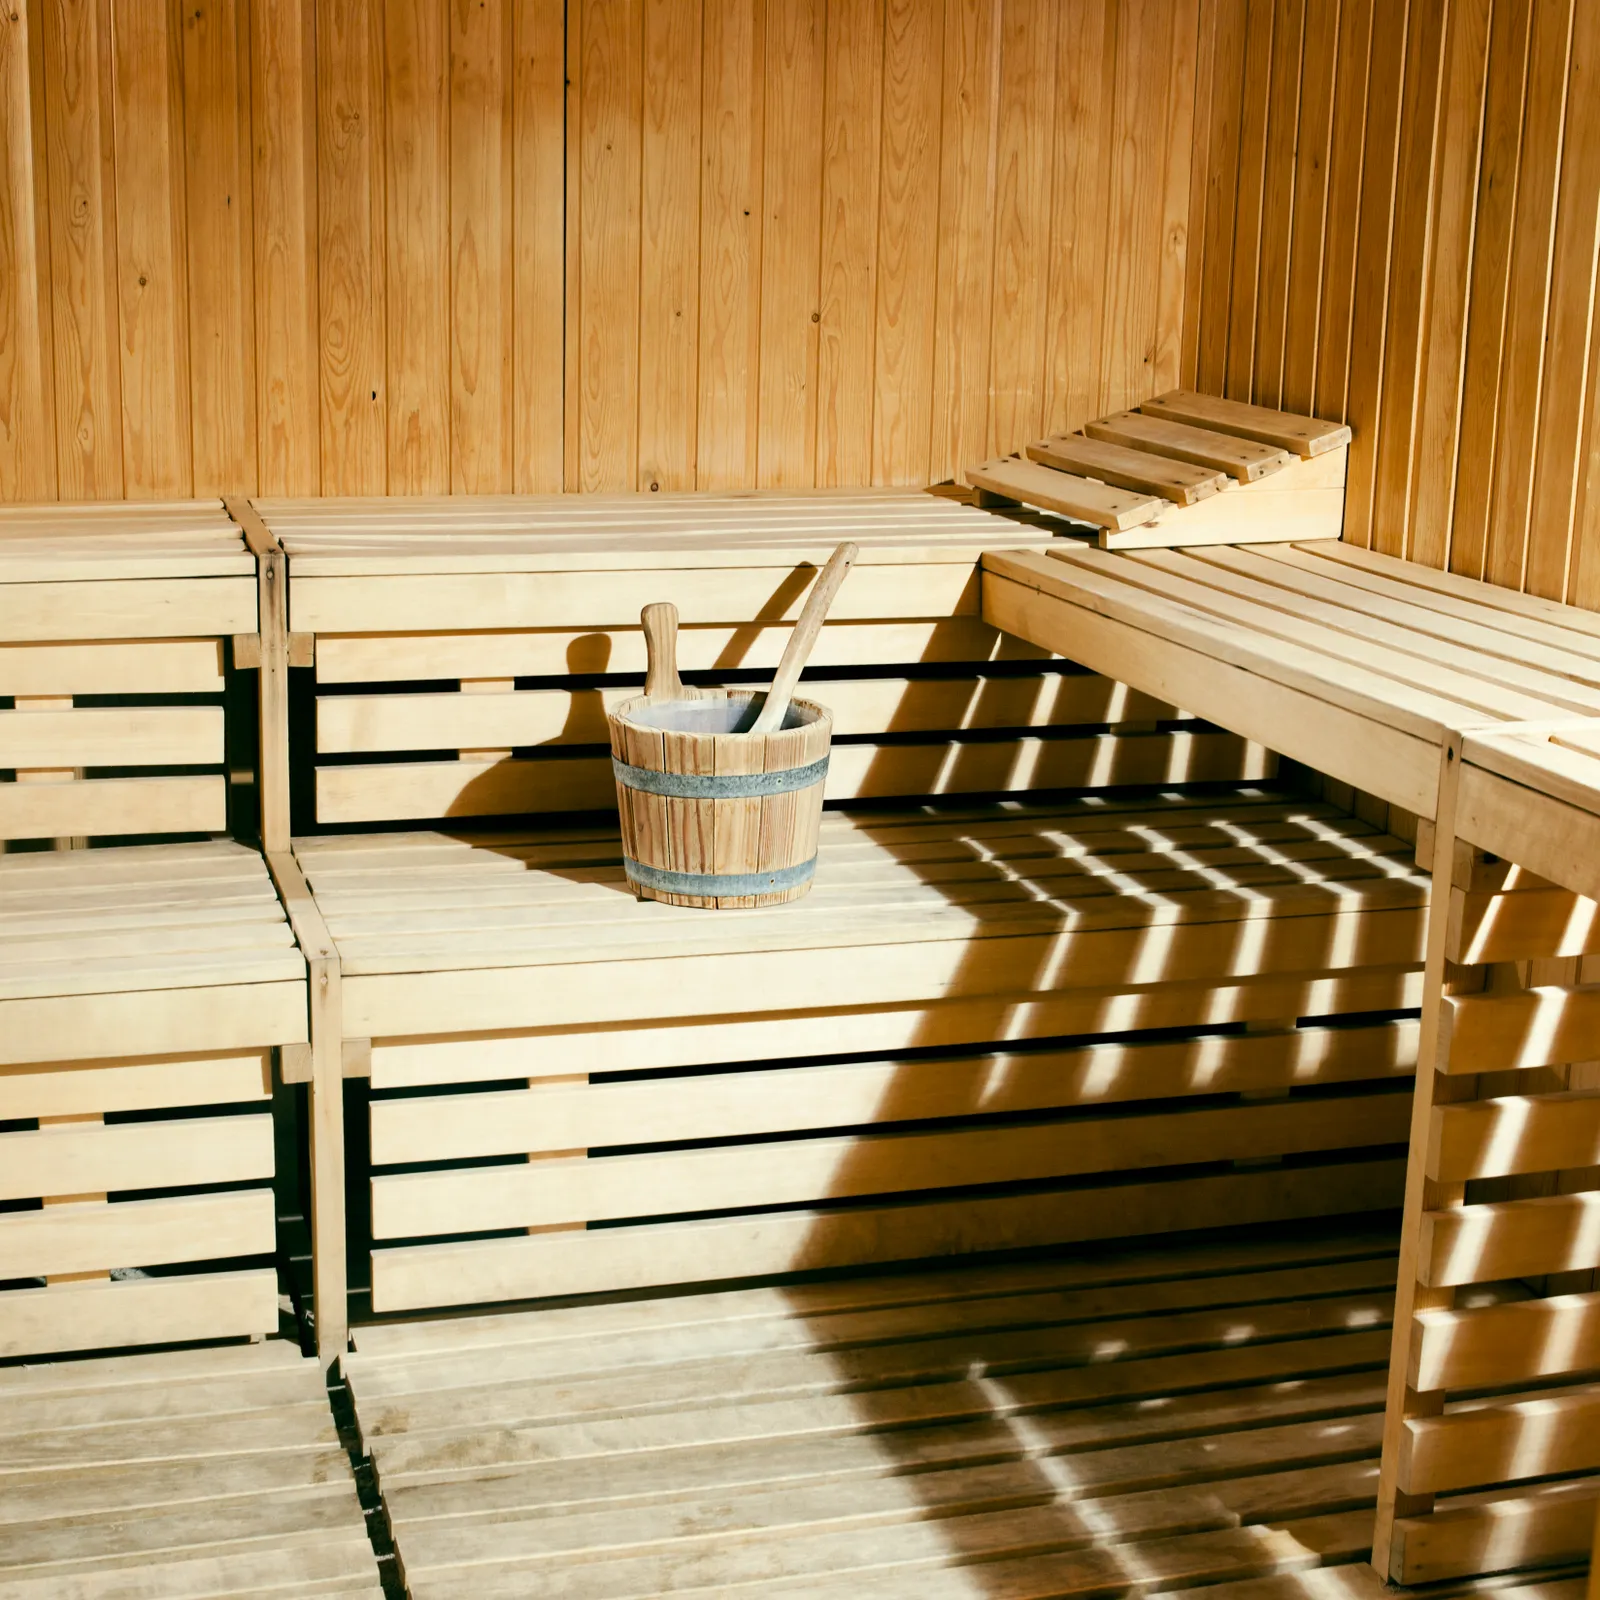 materials needed for a diy sauna project